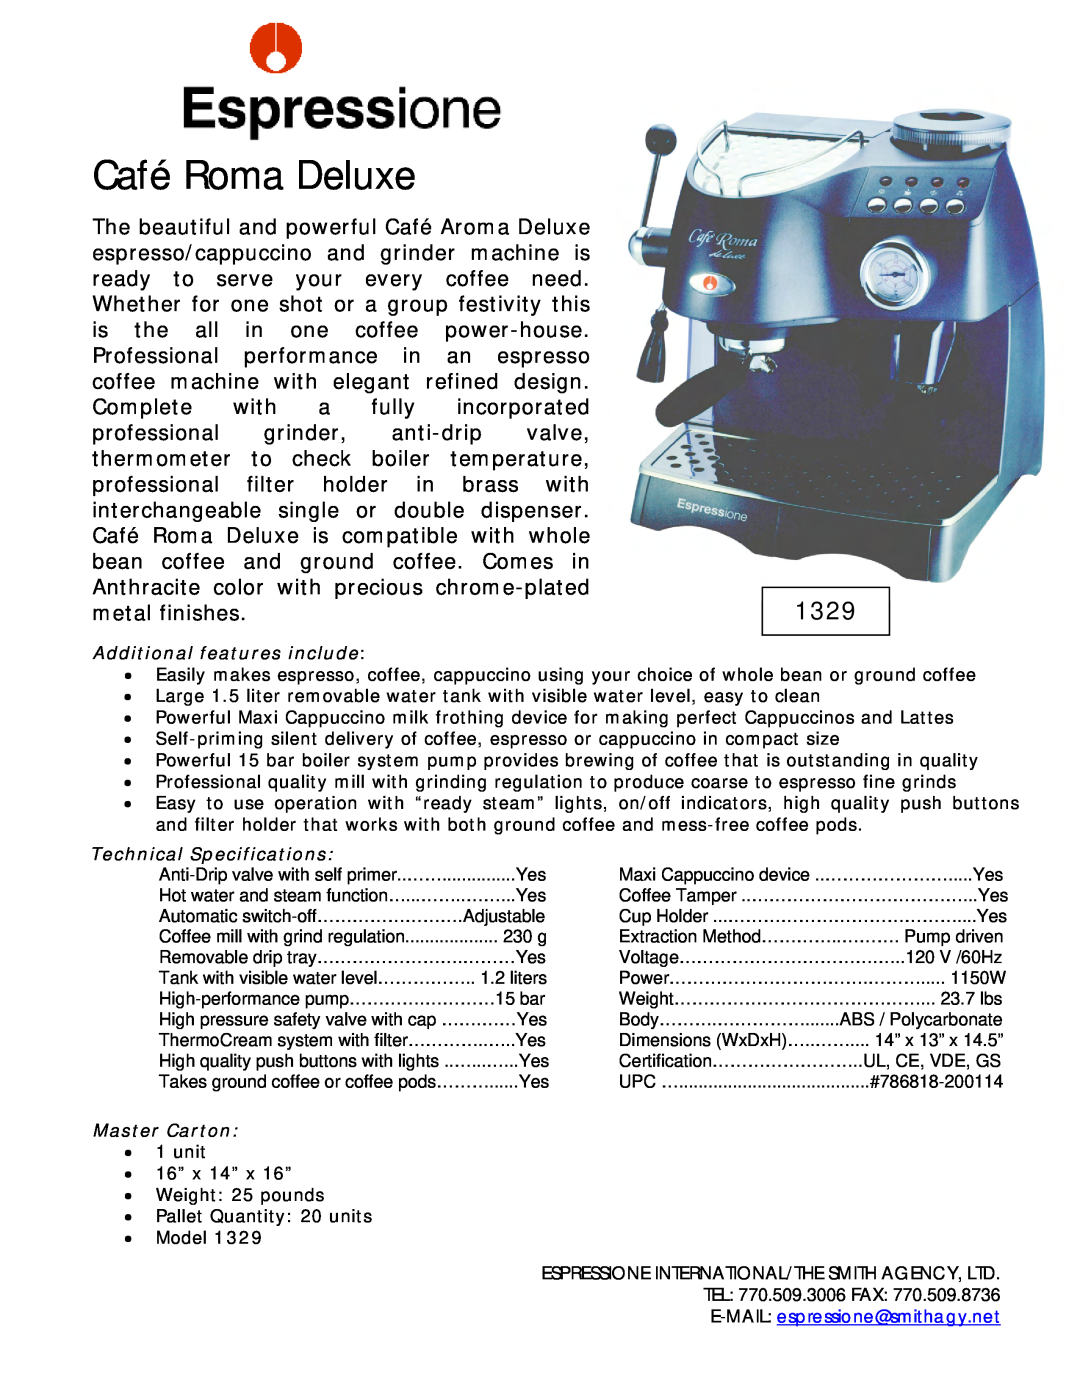 Dualit 1329 technical specifications Café Roma Deluxe, Additional features include, Technical Specifications 